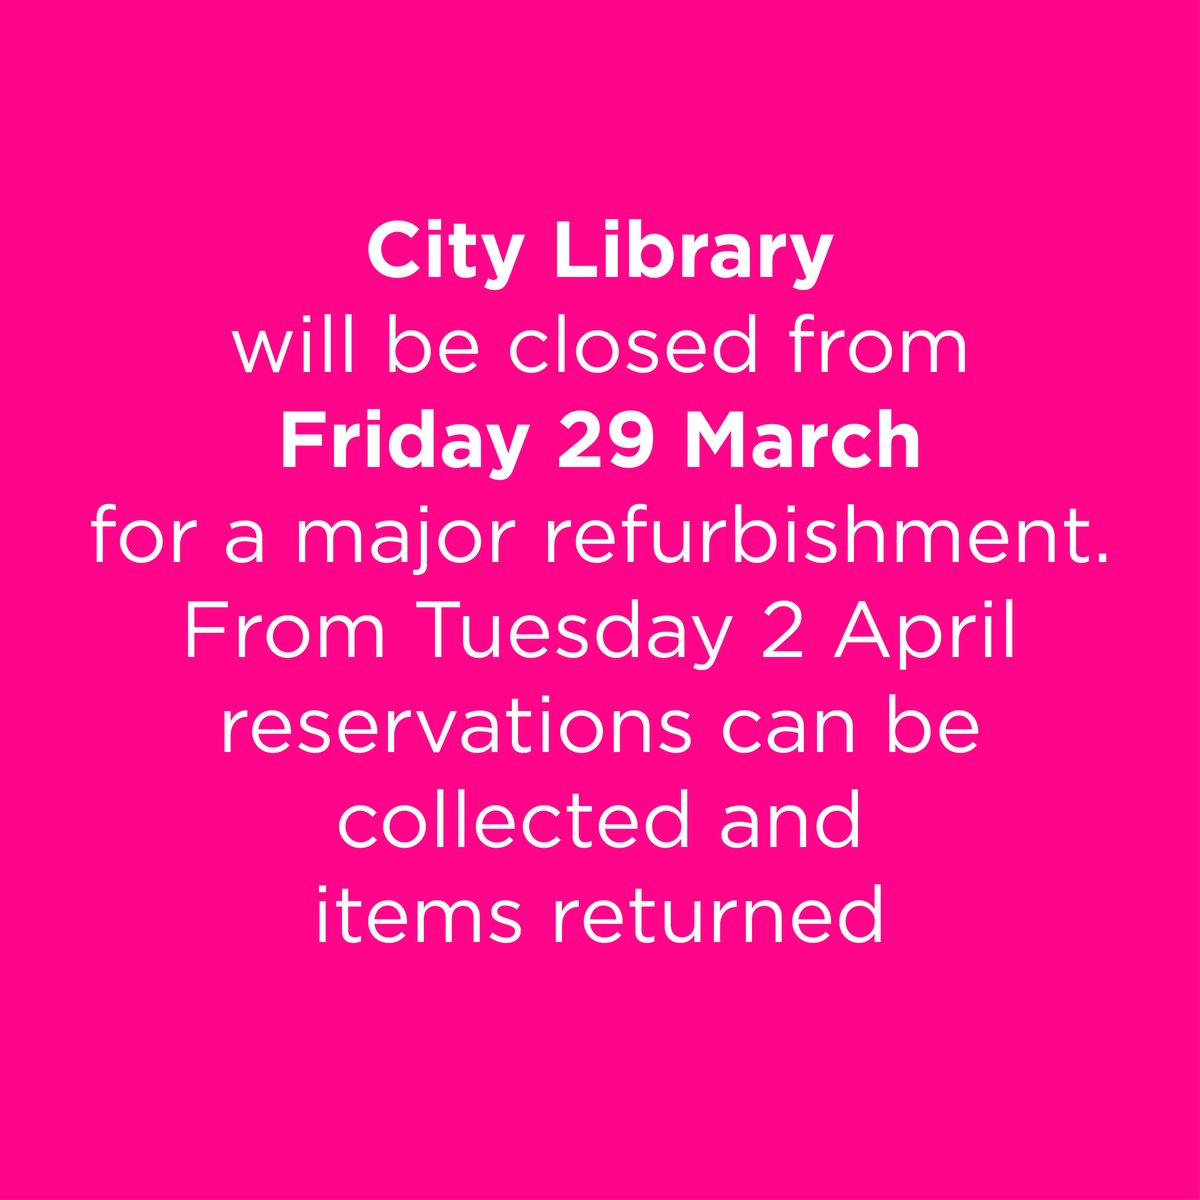 Today is our final day at City Library for a little while as renovation works are set to begin. The library will be closed for a revamp from Friday 29 March until mid 2024. From Tuesday 2 April you can collect reservations and return items: bit.ly/3QWnLtz